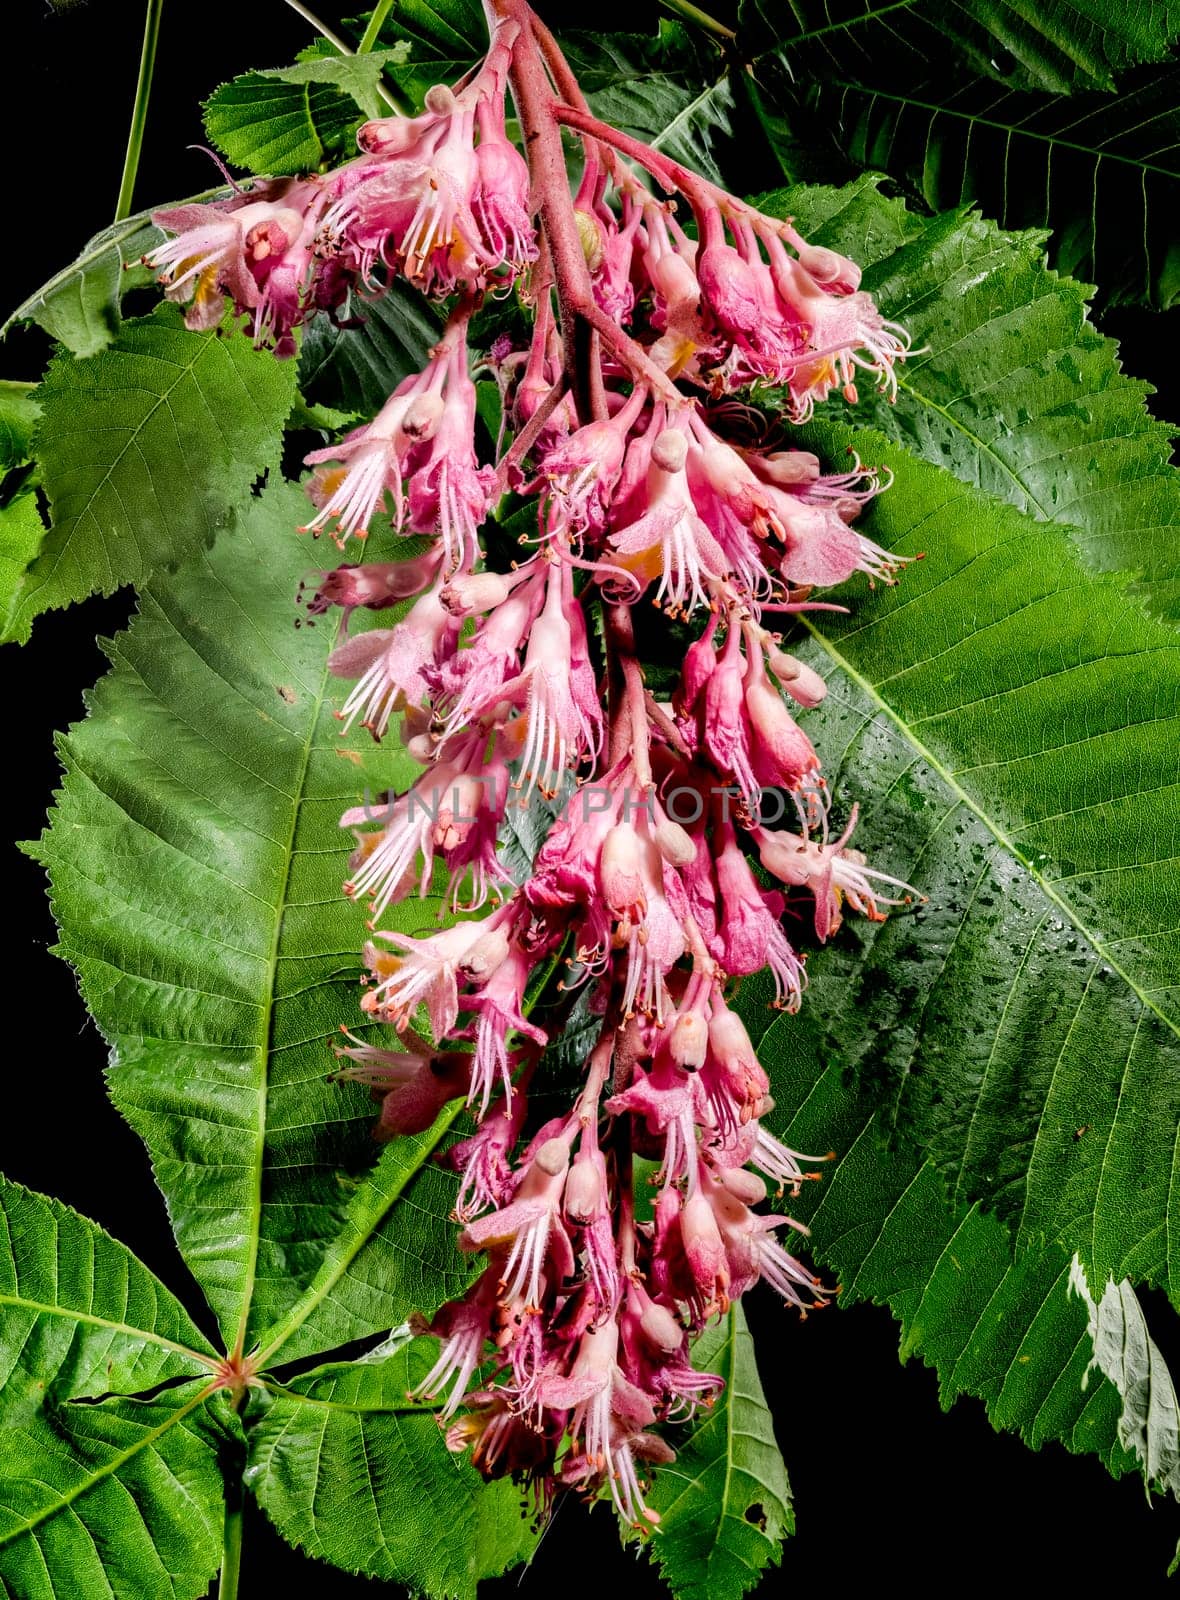 Blooming red horse-chestnut flowers on a black background by Multipedia